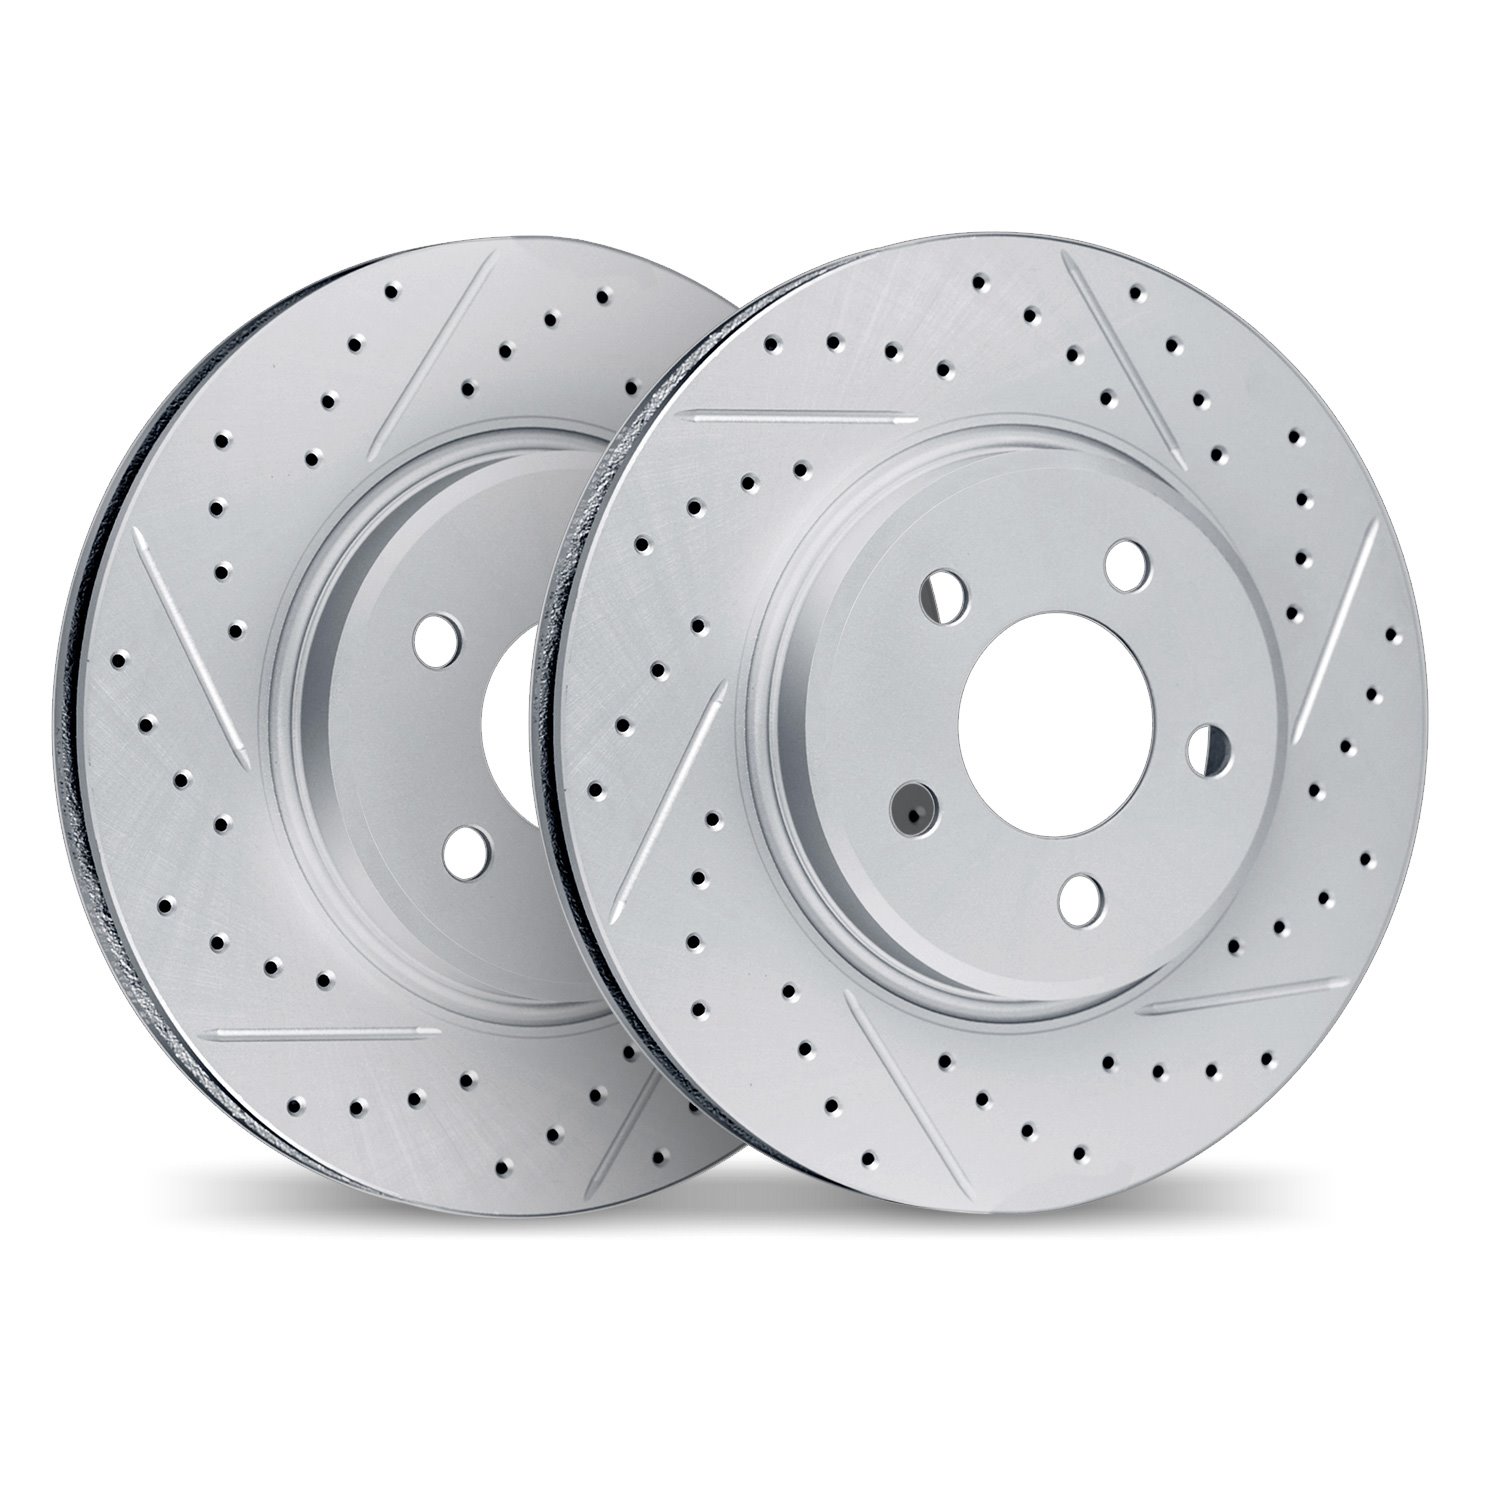 2002-13014 Geoperformance Drilled/Slotted Brake Rotors, Fits Select Subaru, Position: Front